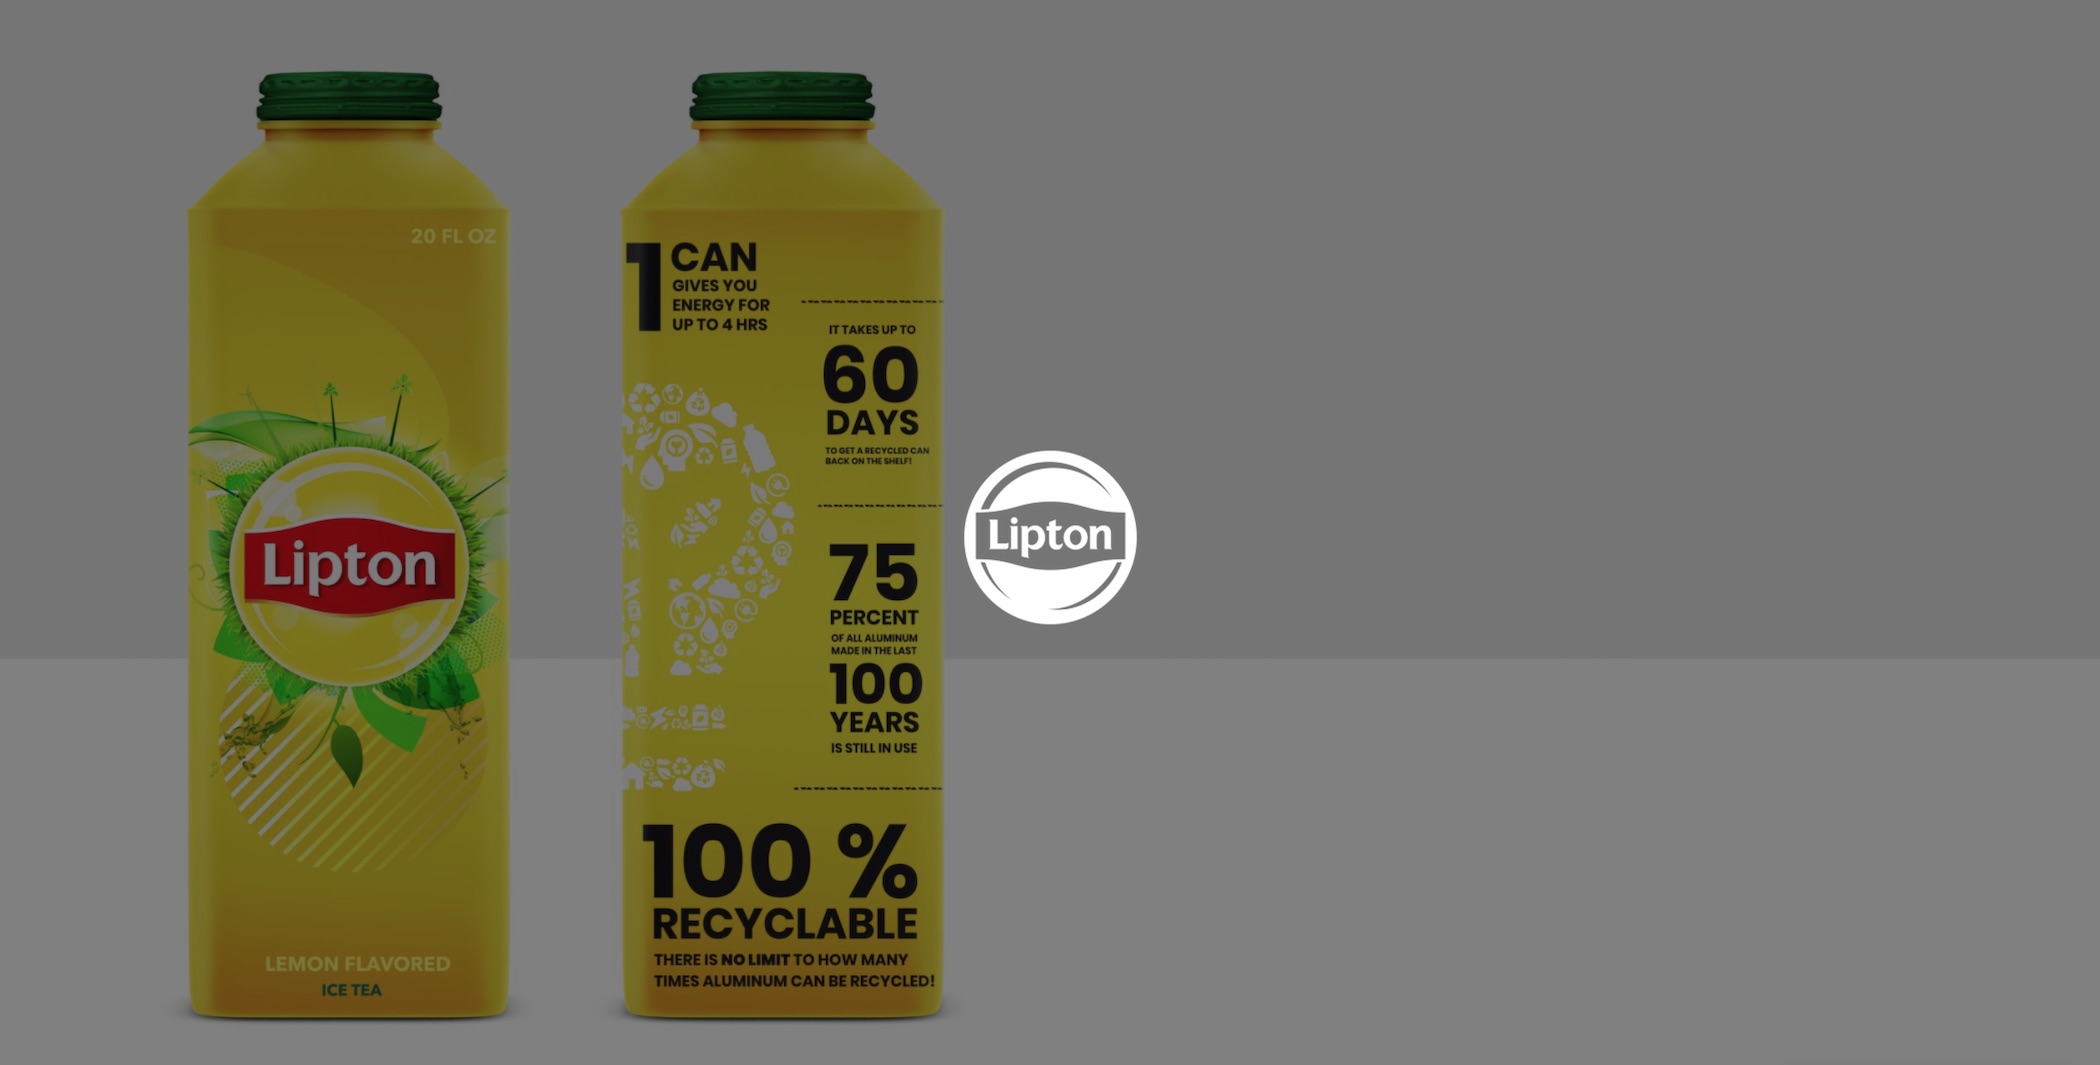 White Lipton logo with dimmed background with display of front and back of Lipton container